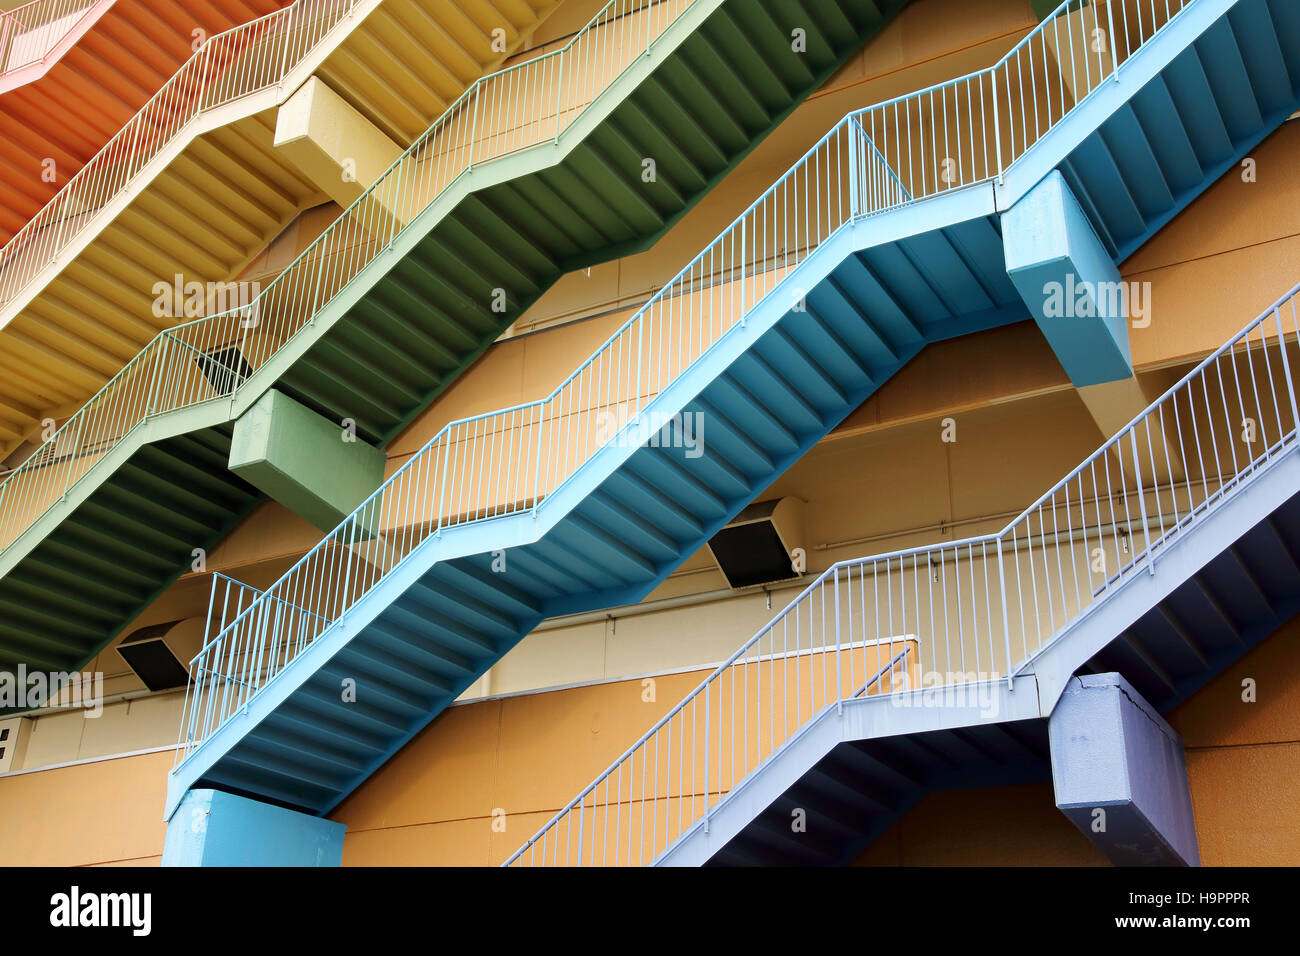 Fire escape stairs of the building Stock Photo